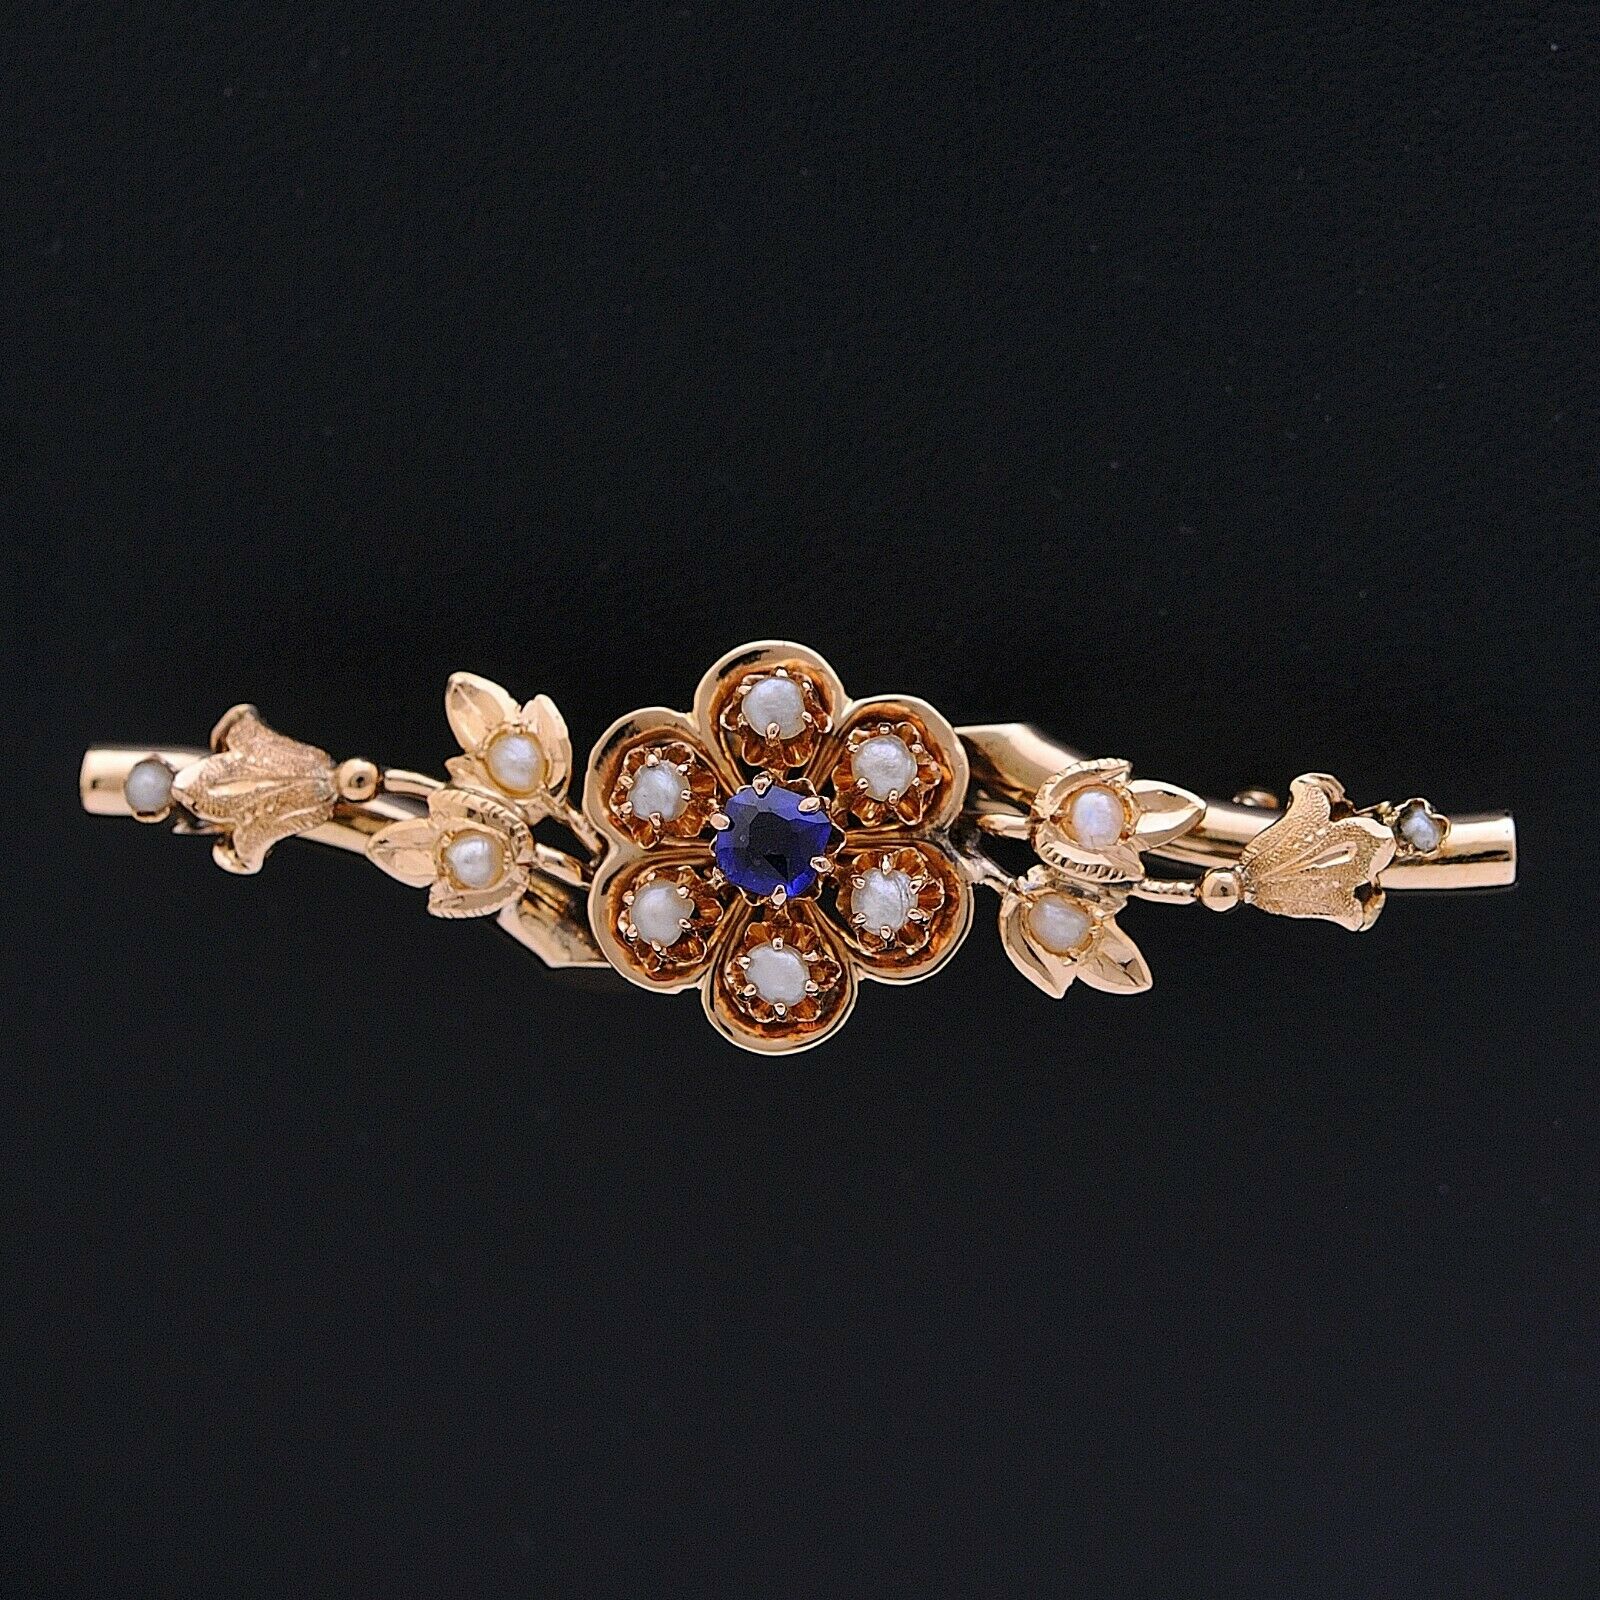 Vintage Brooch In Rose Gold 9 Carats With Pearls And Sapphire 0.40 Ct